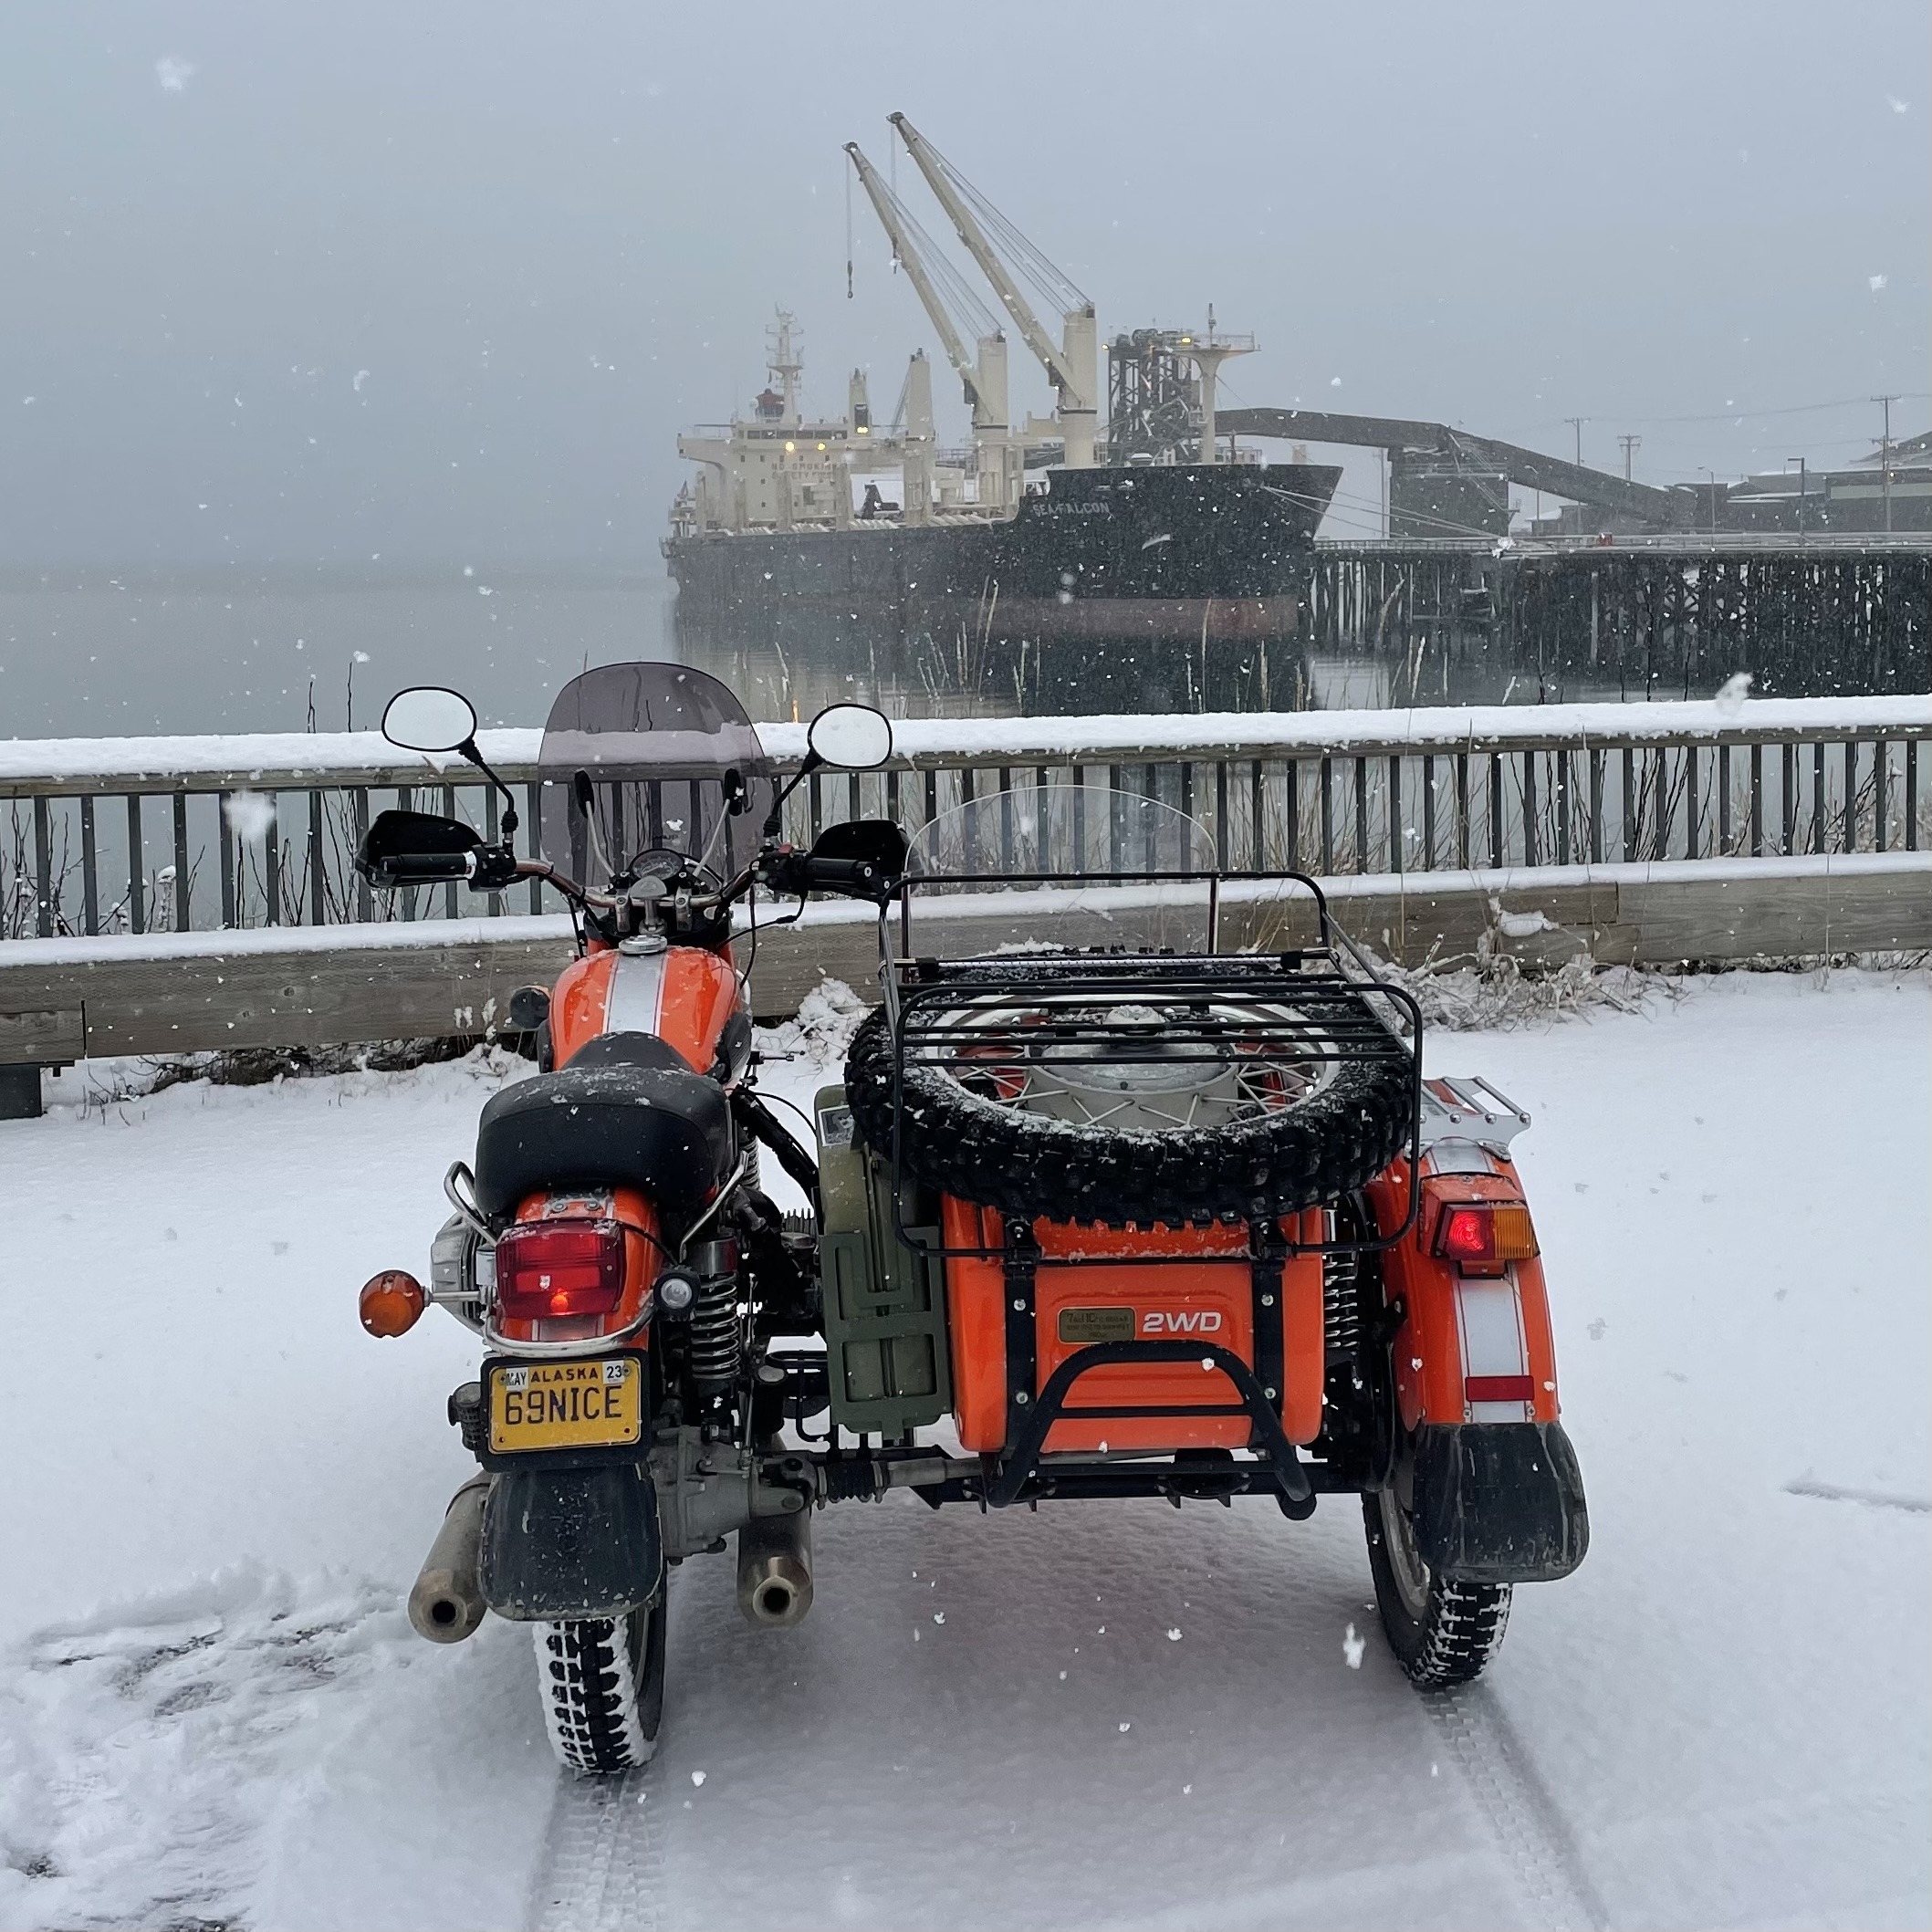 Orange motorcycle and side car parked in snow, ore ship being loaded on docks behind, snow falling